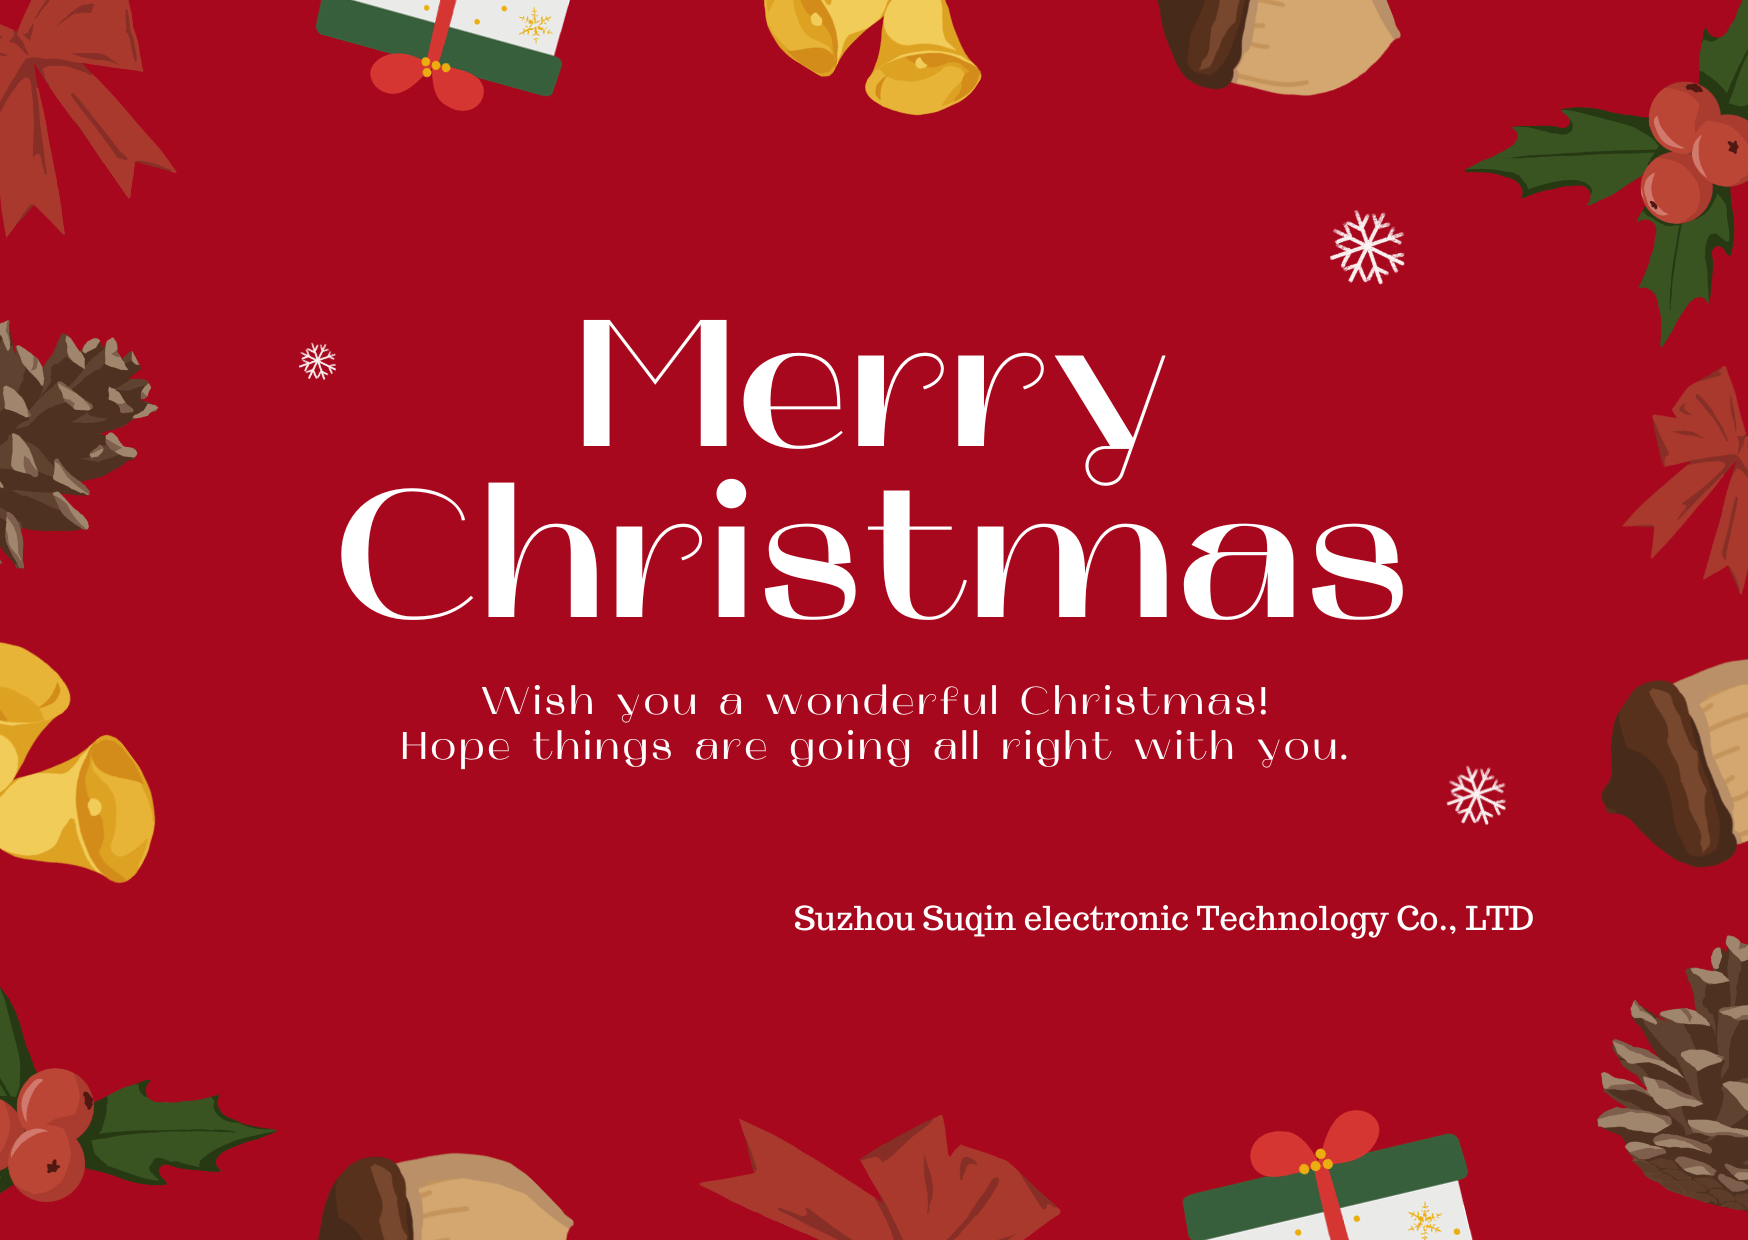 Wishing you a very Merry Christmas and a fantastic start to the new year.